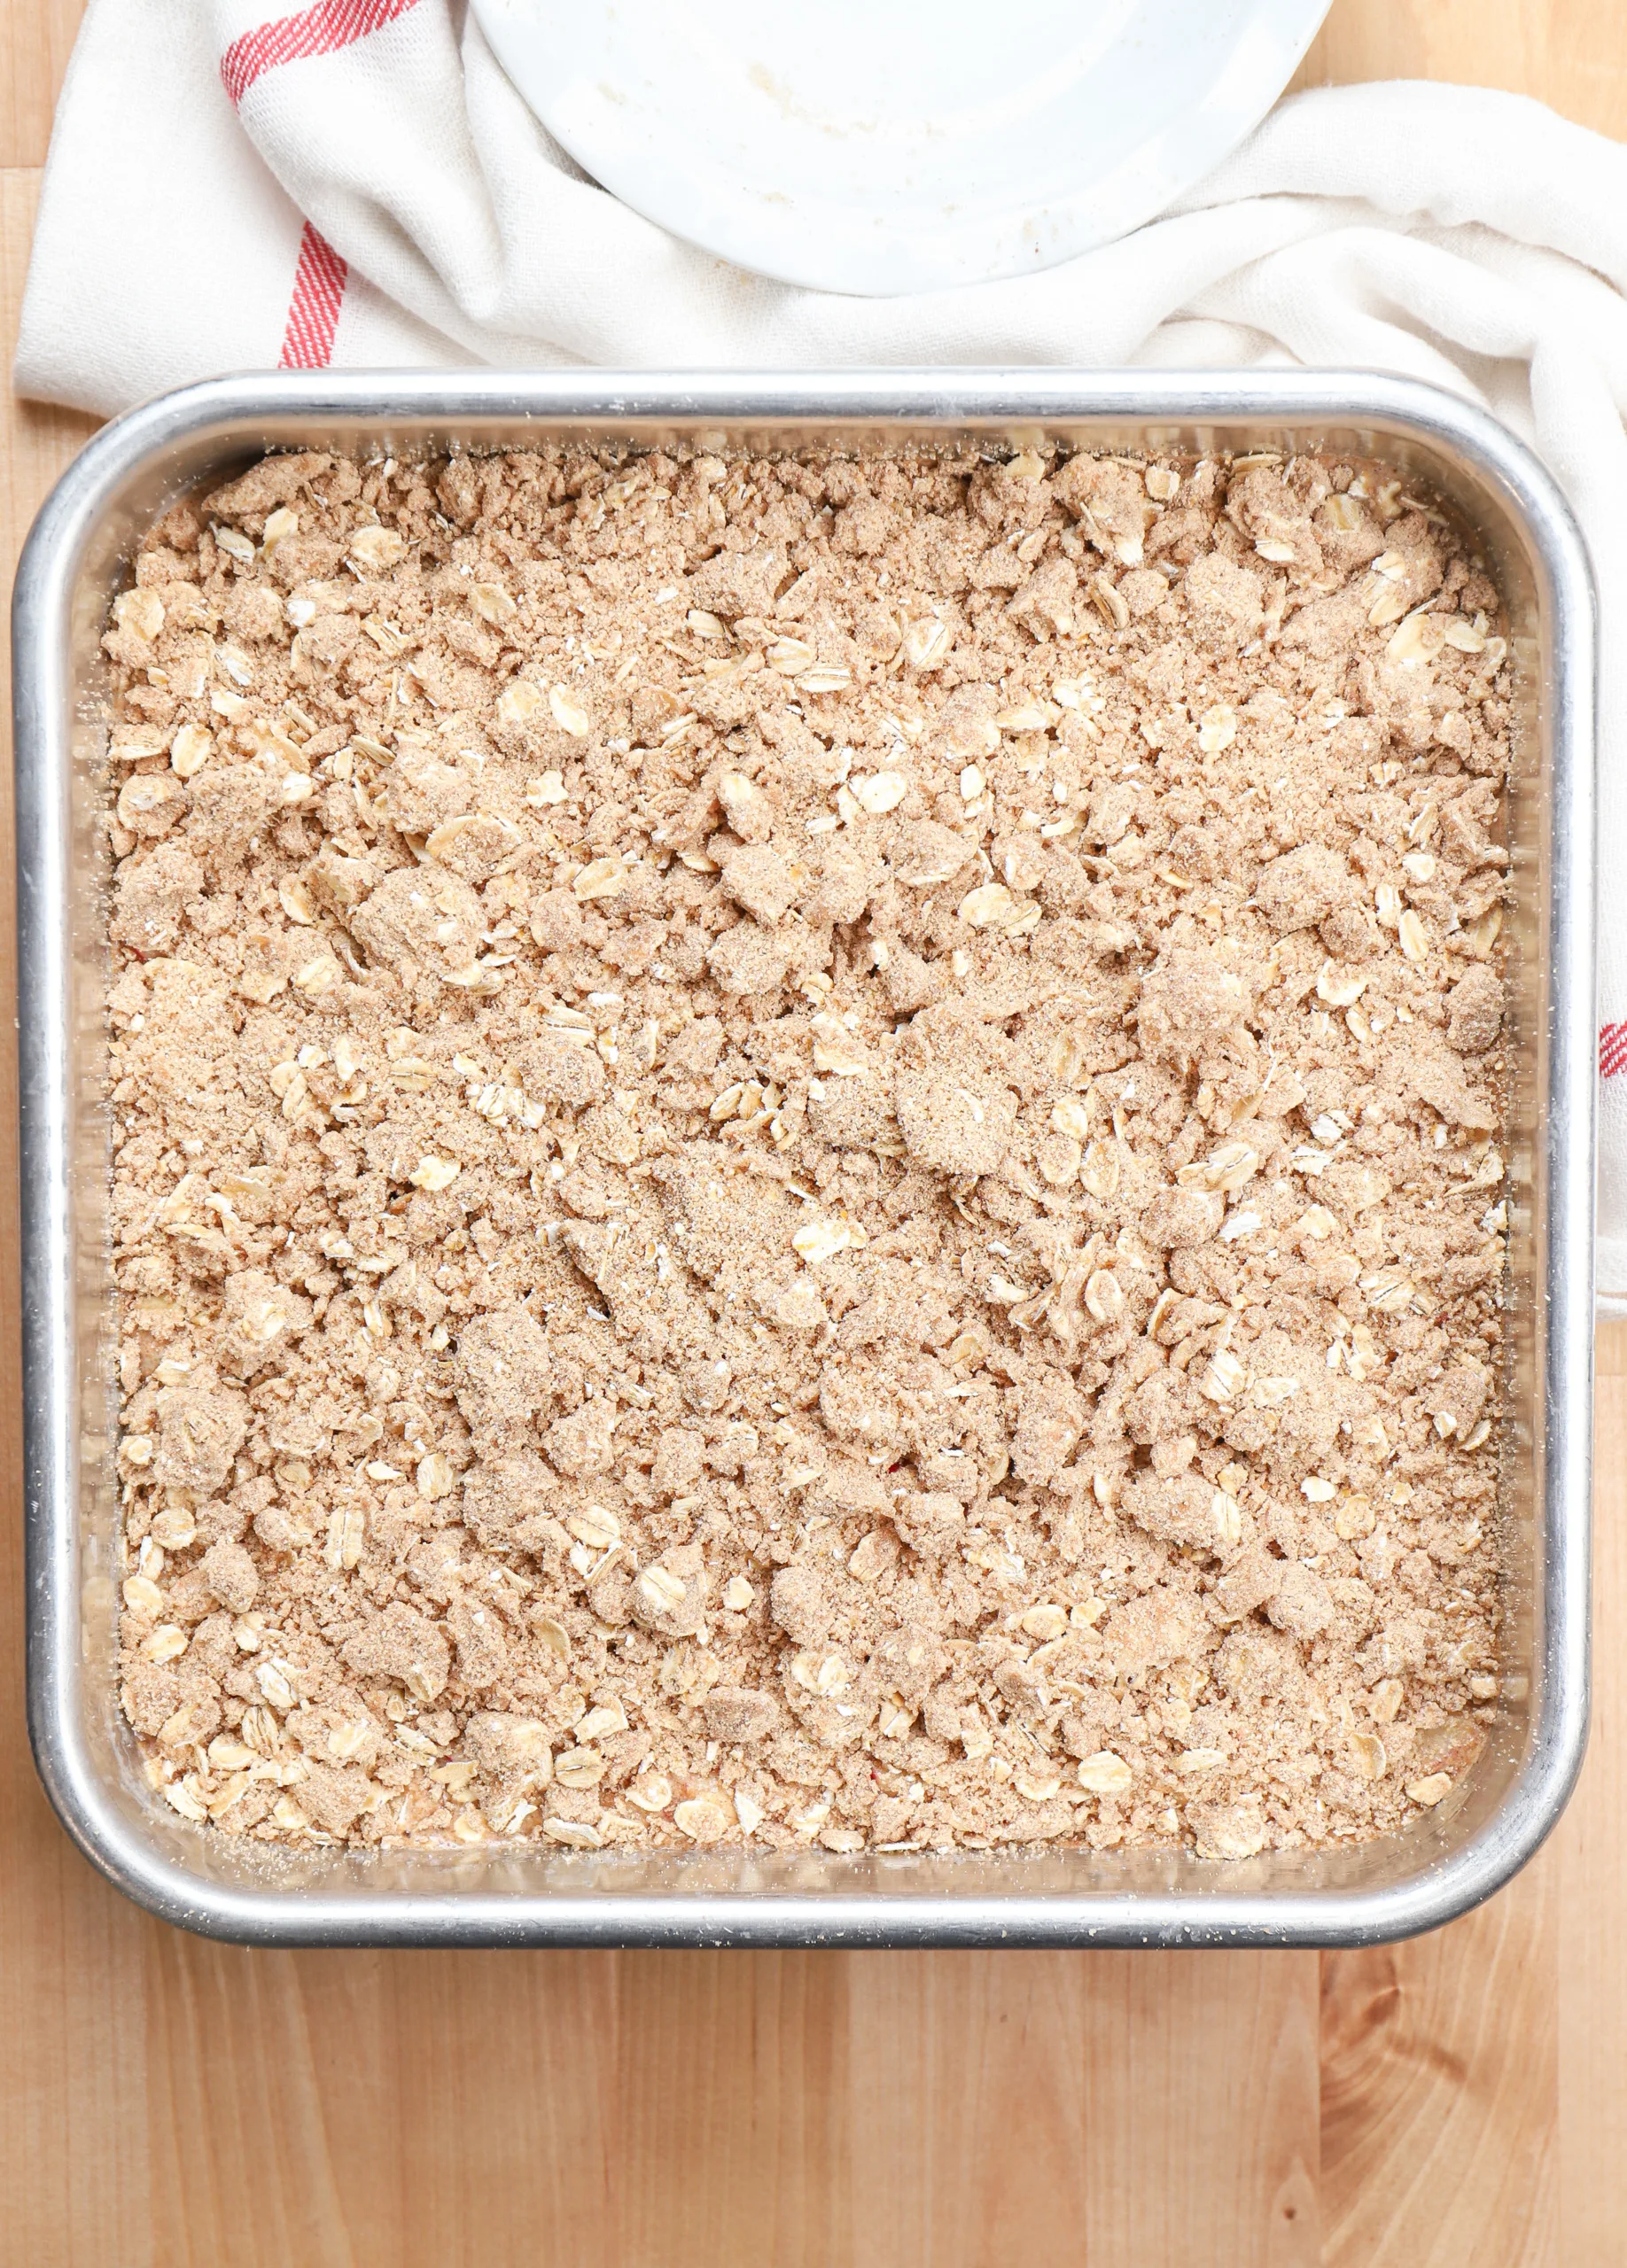 Overhead view of the apple streusel baked oatmeal before baking.